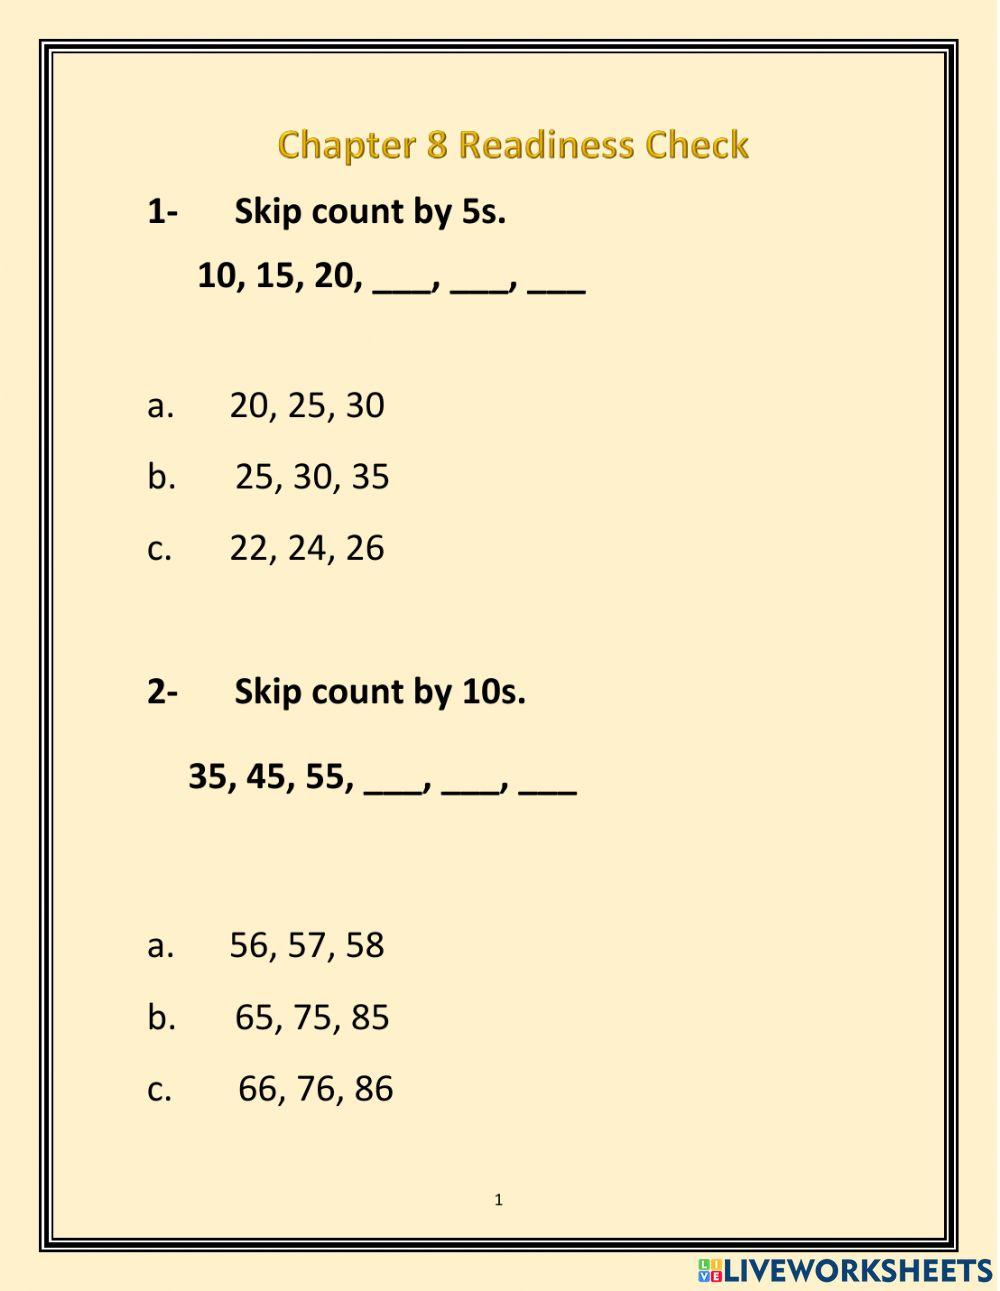 Chapter 8 Readiness Check- Skip Count